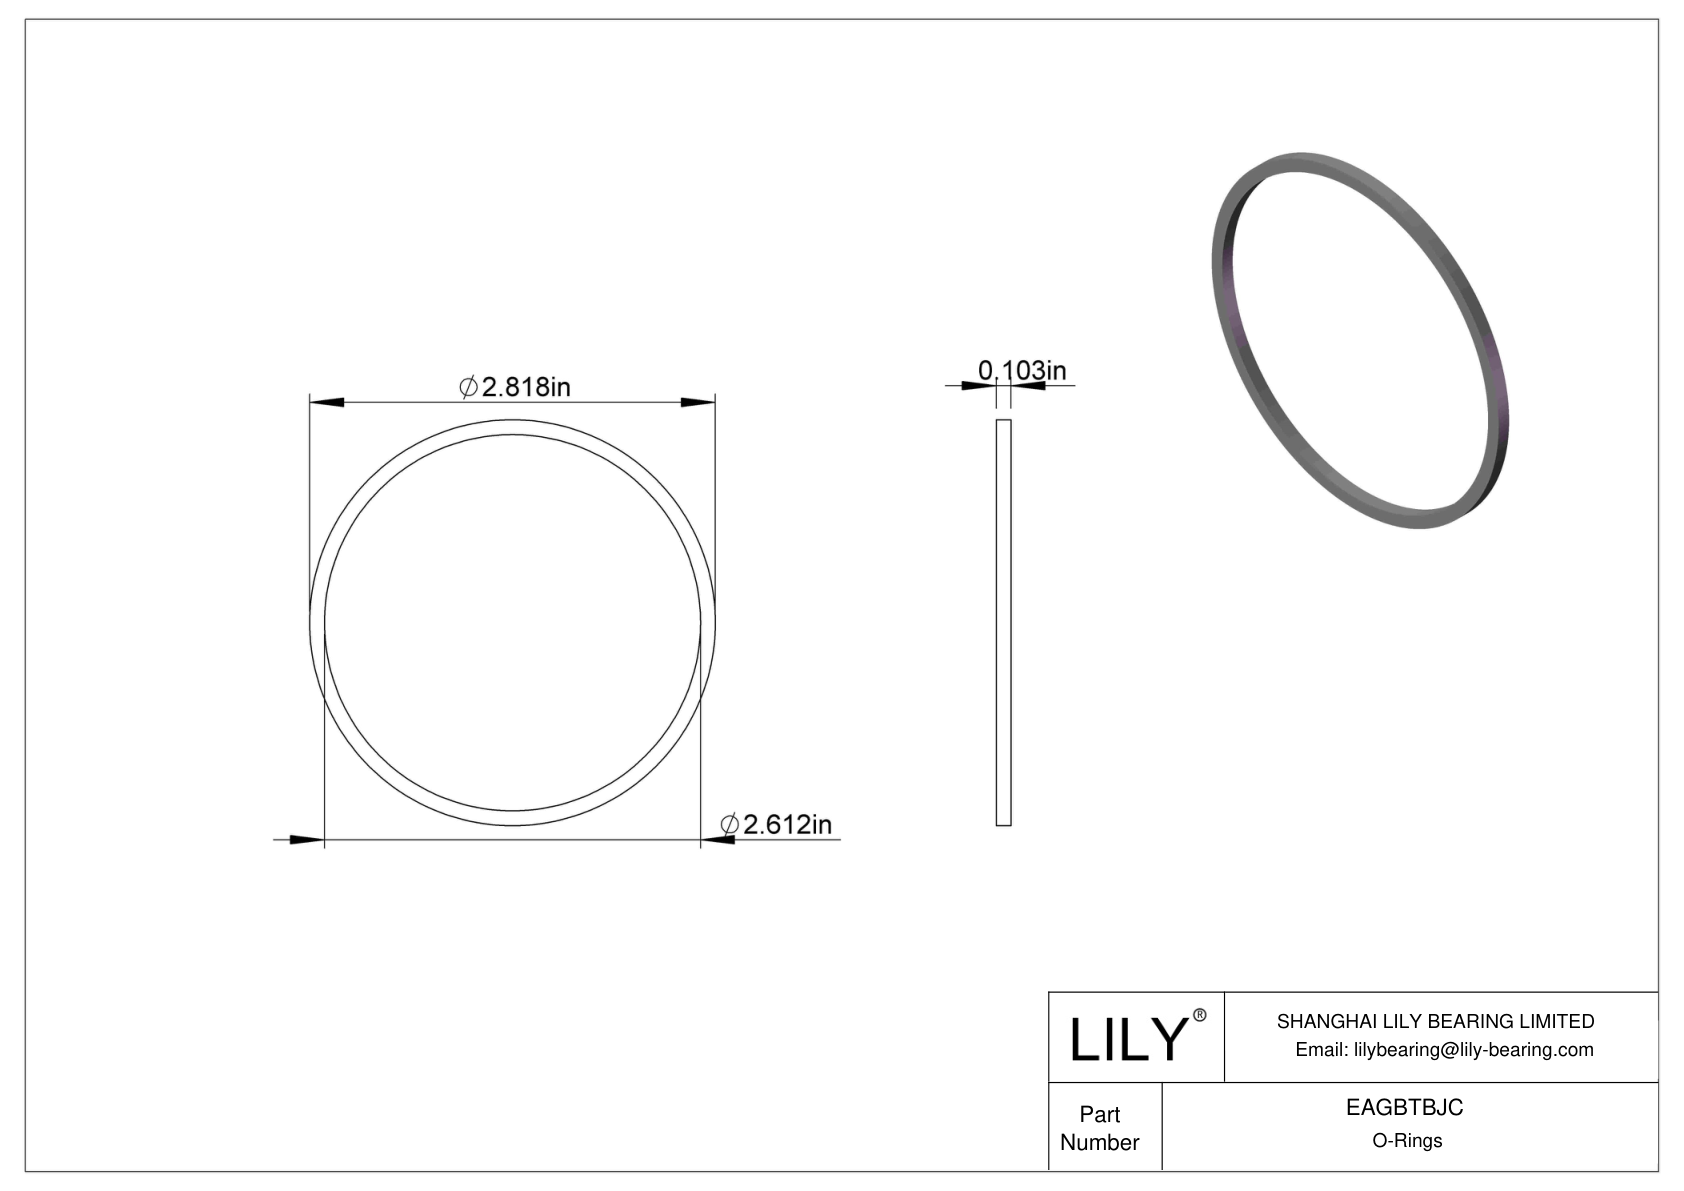 EAGBTBJC Oil Resistant O-Rings Square cad drawing